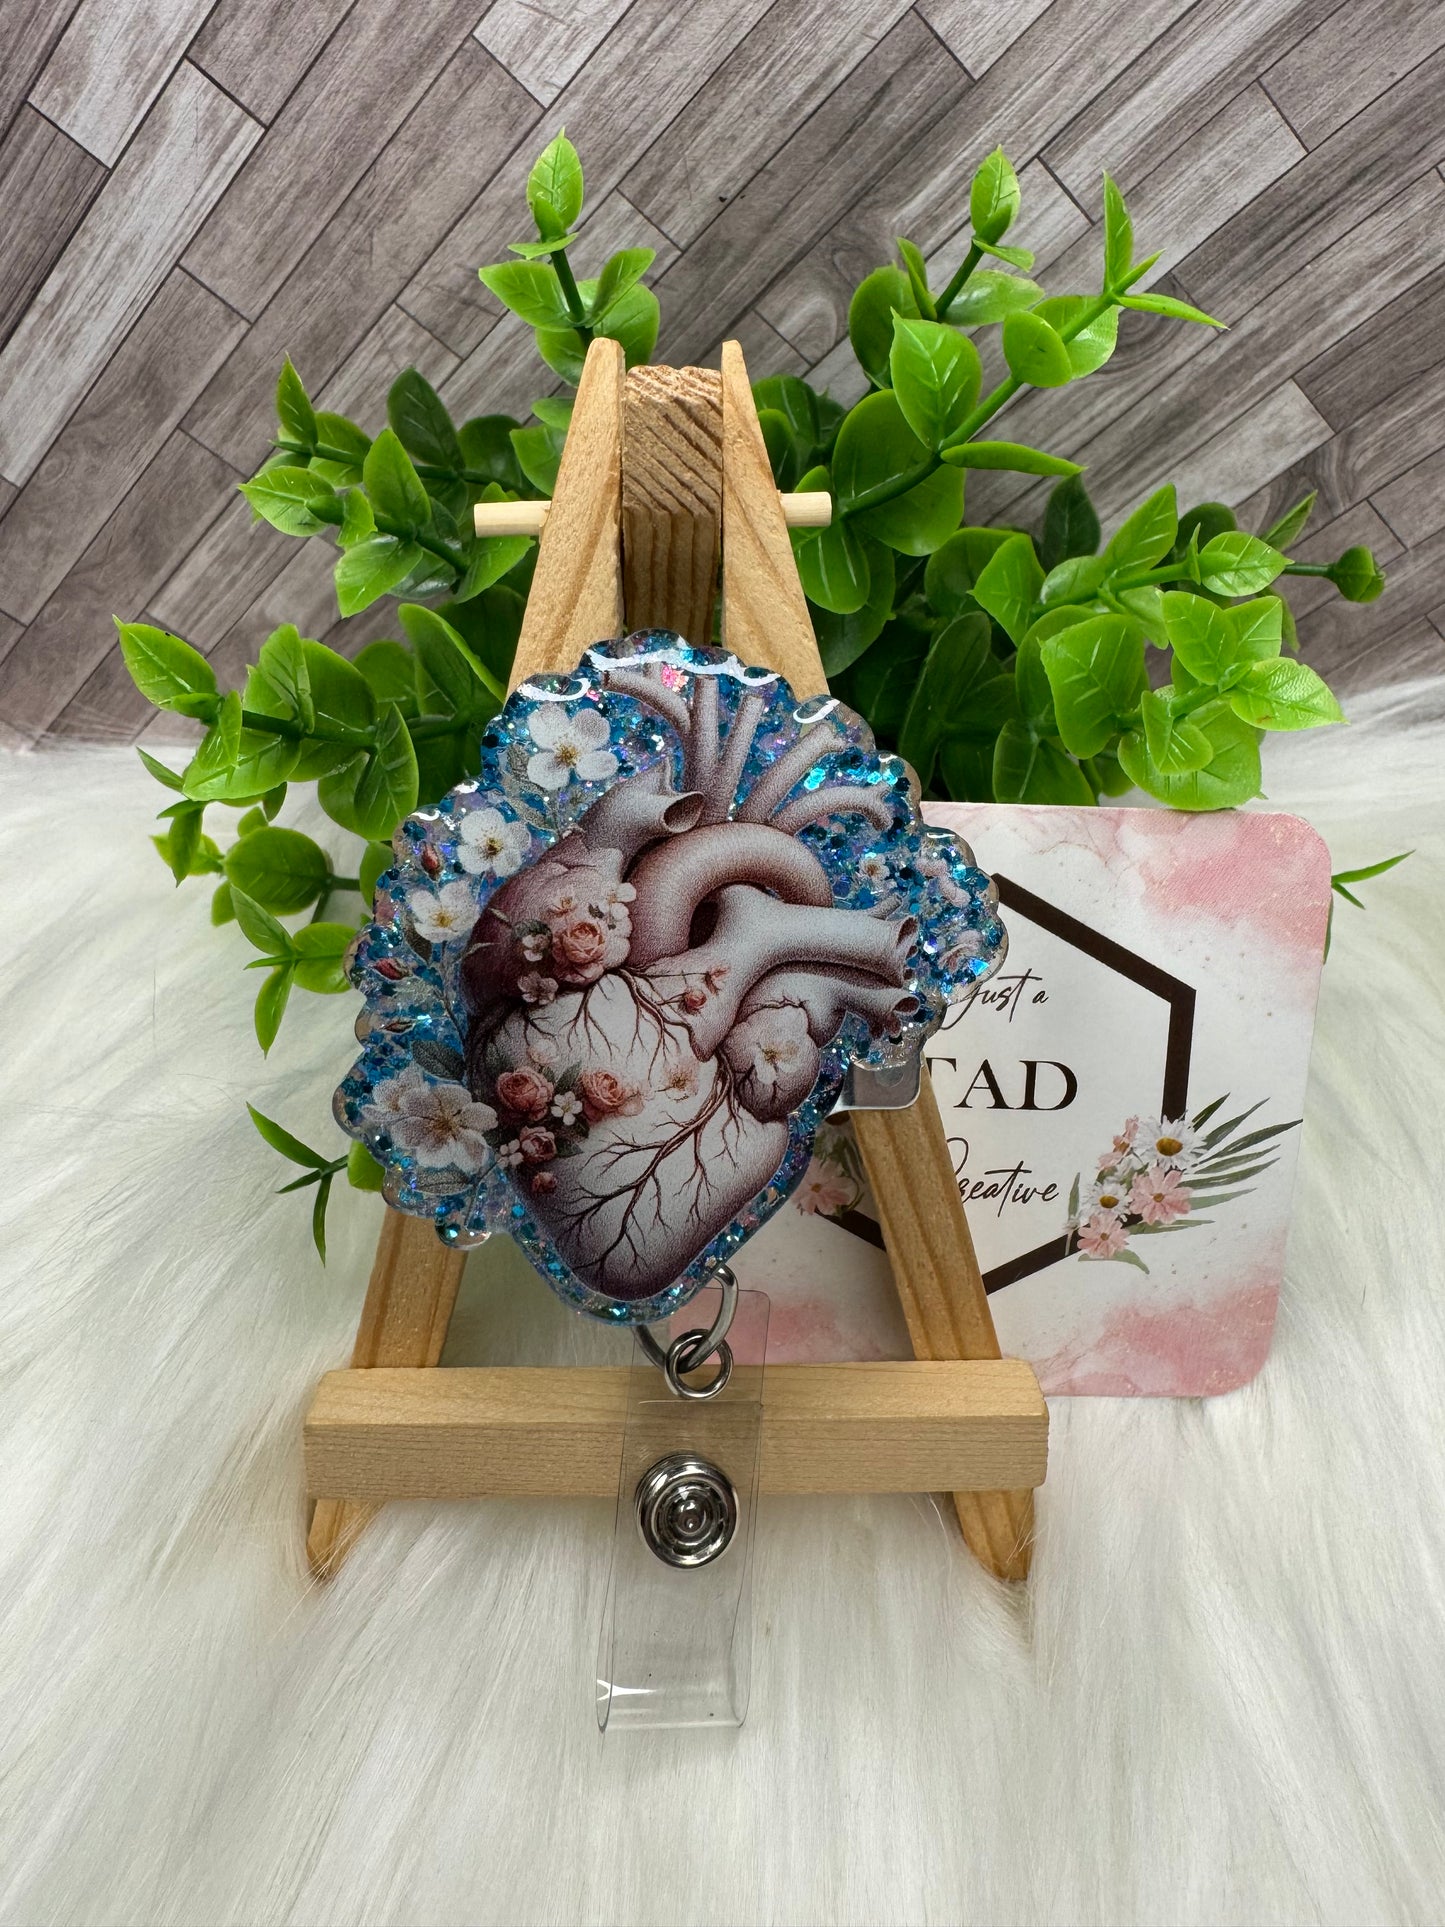 Floral Anatomical Heart #2 Interchangeable Badge Topper